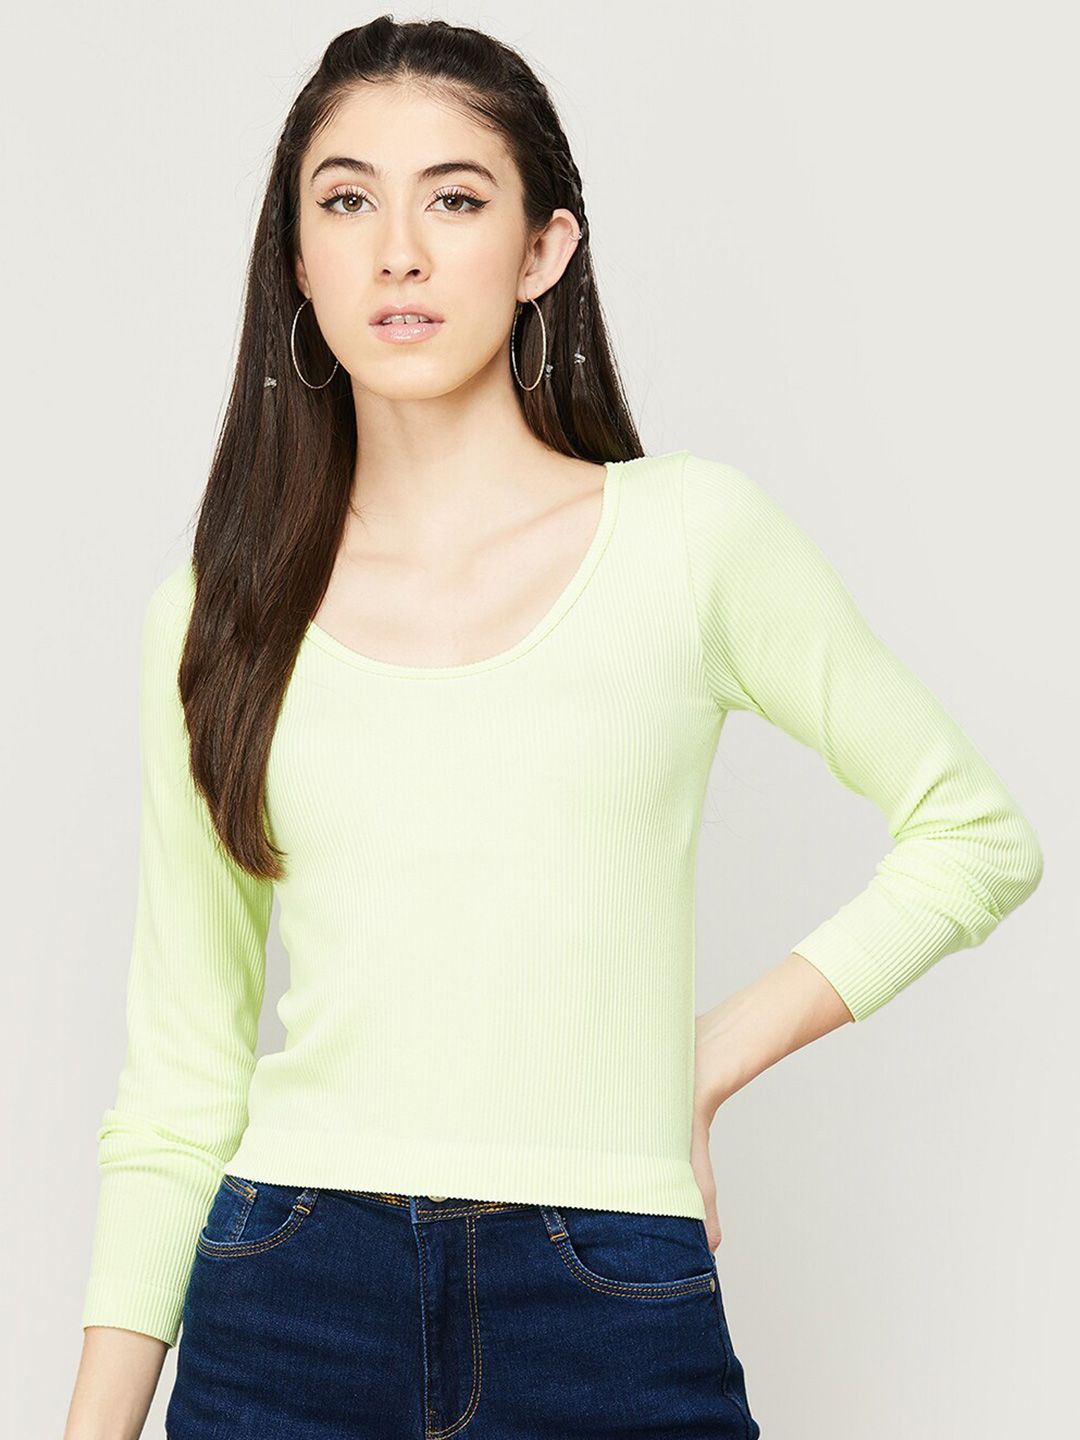 Ginger by Lifestyle Green Solid Nylon Top Price in India